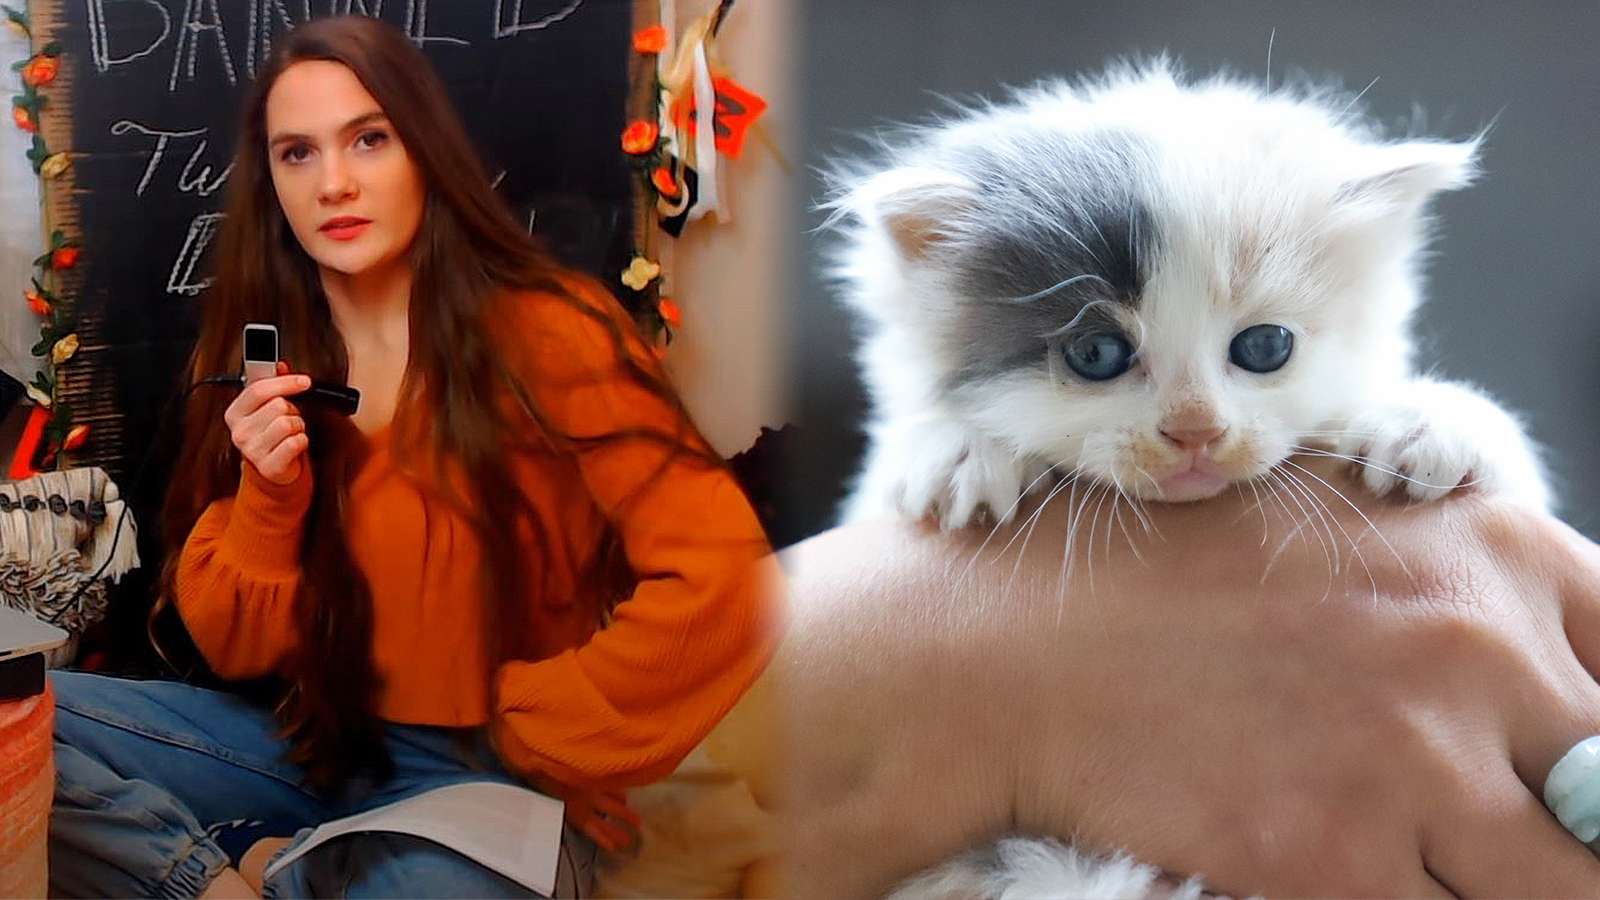 Twitch streamer Alisha is shown next to a photo of a small kitten.